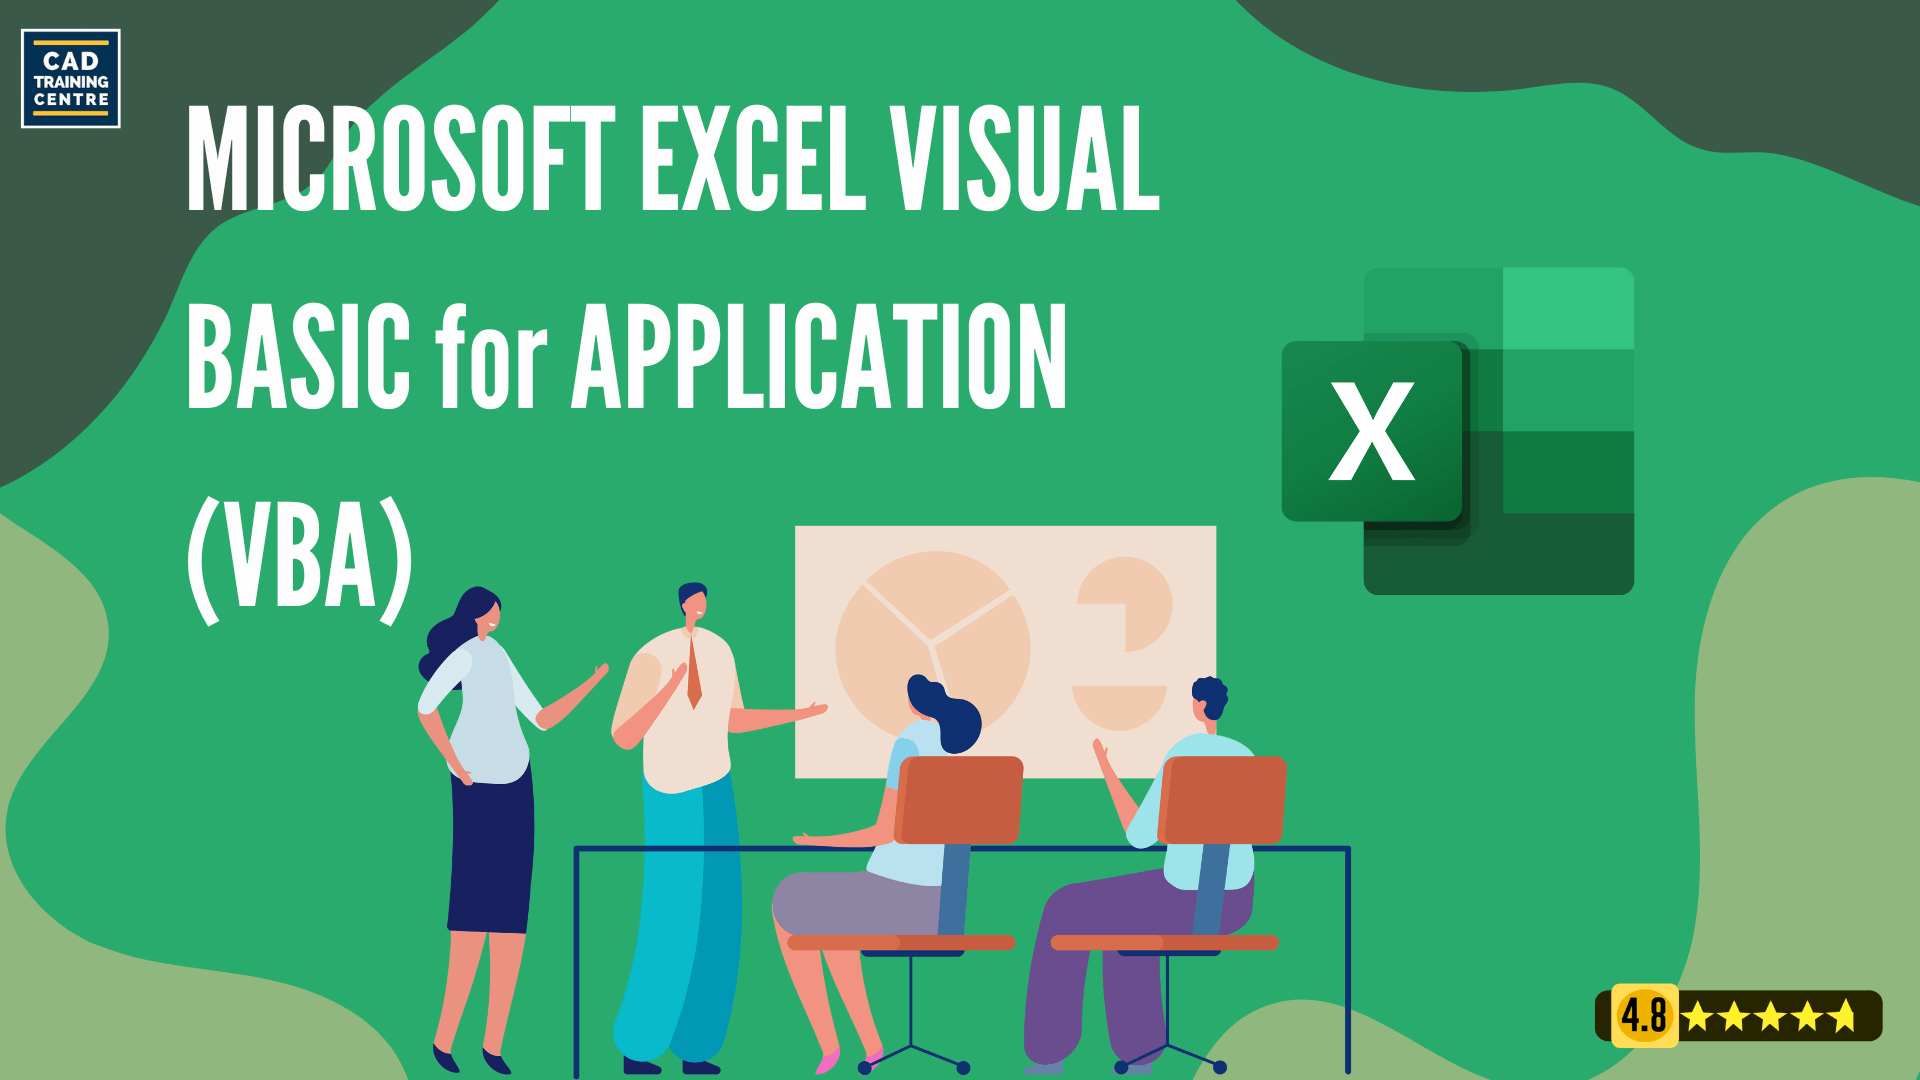 Learn Microsoft Excel Visual Basics for Applications with cadtraining